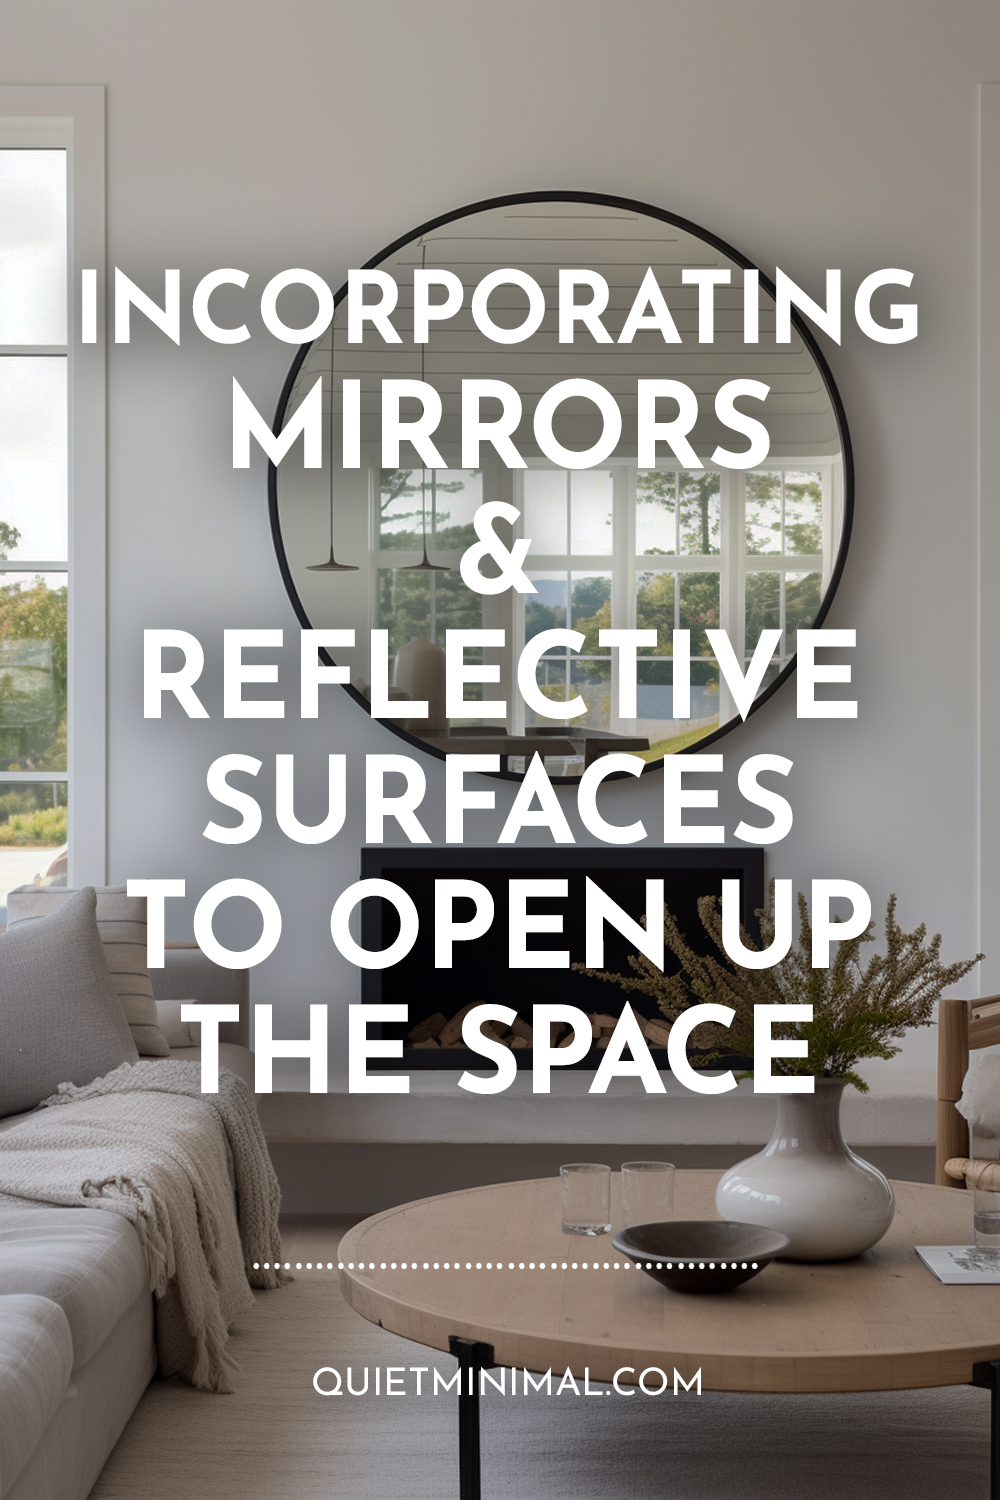 A living room with mirrors and reflective surfaces to open up the space.